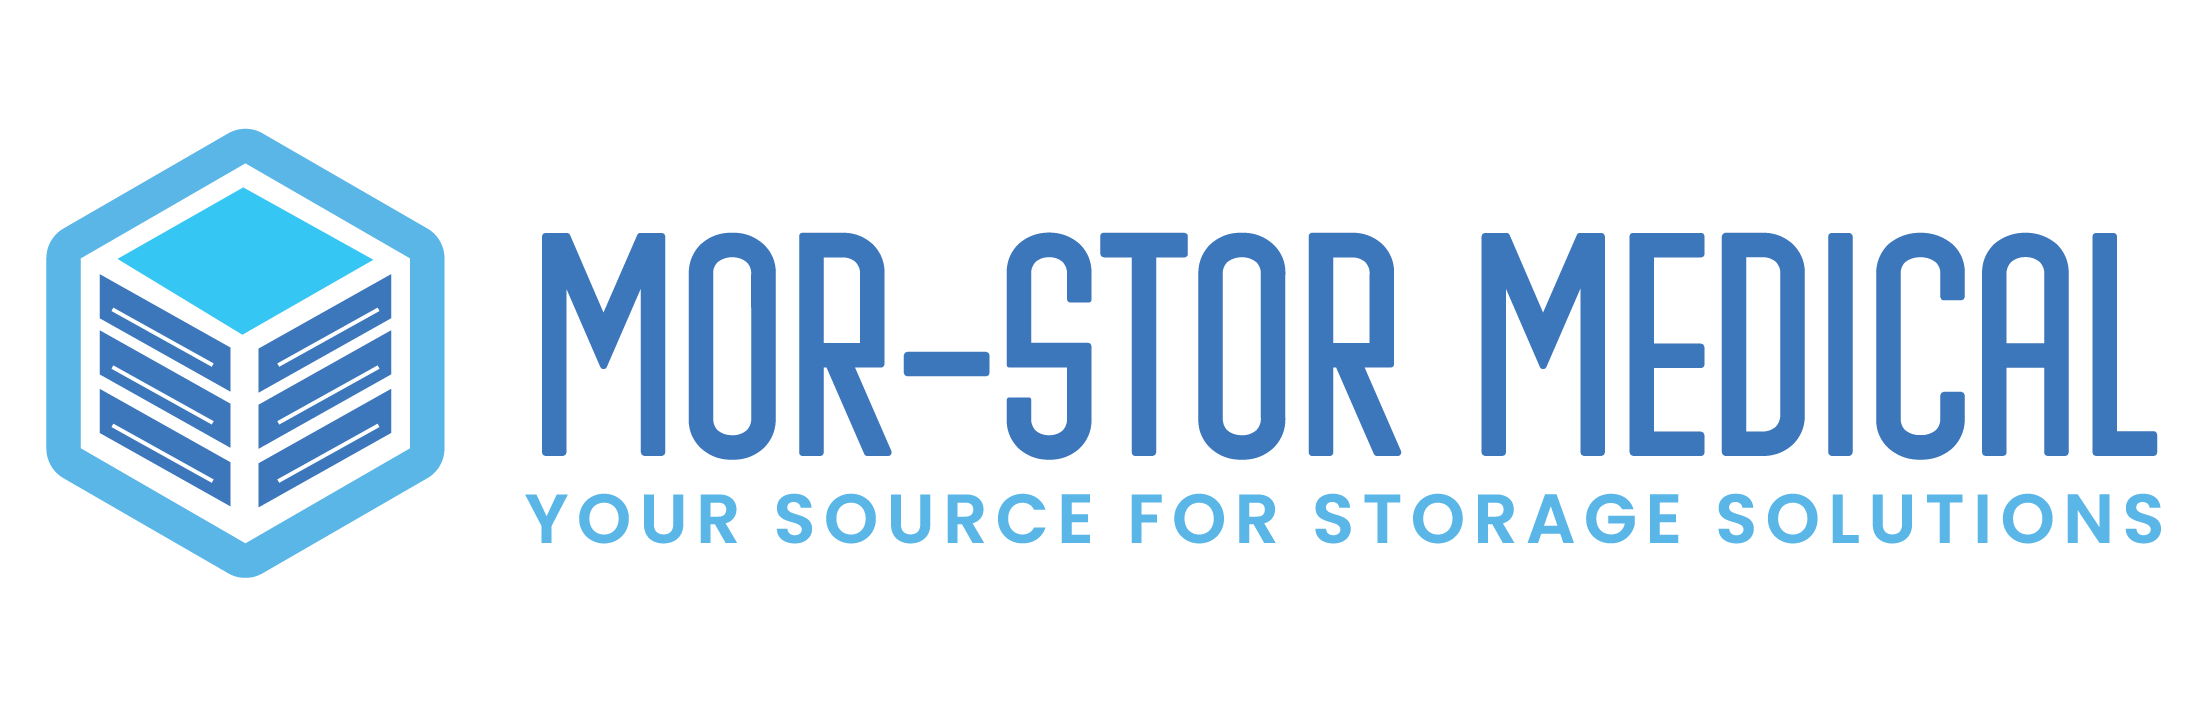 Mor-Stor Medical, Inc. | Your Source for Storage Solutions